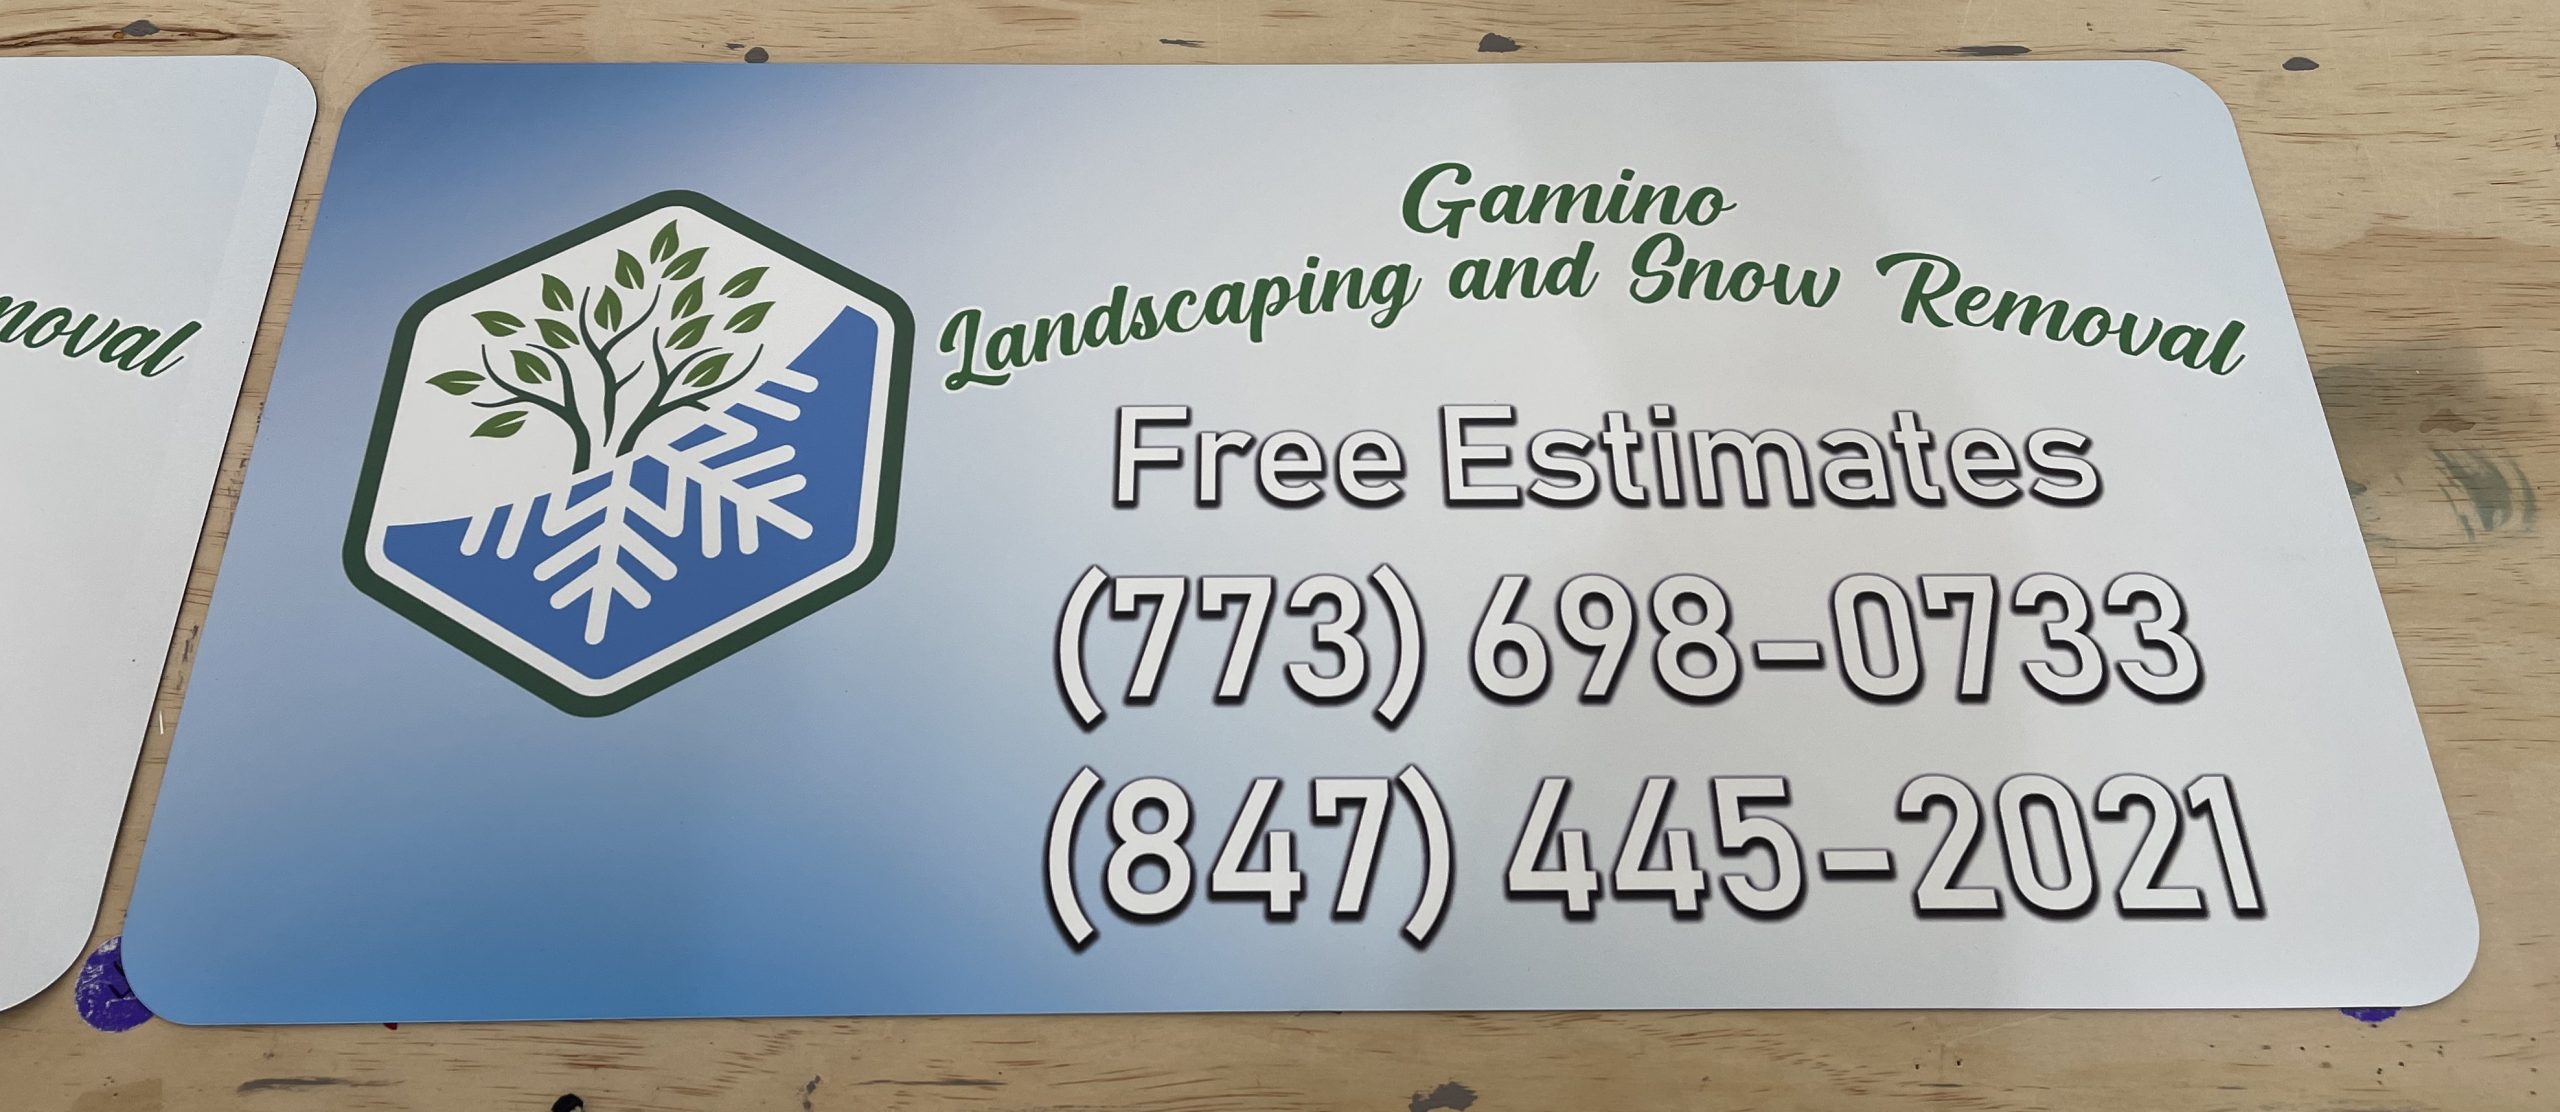 Landscaping & Snow Removal Services in Chicago